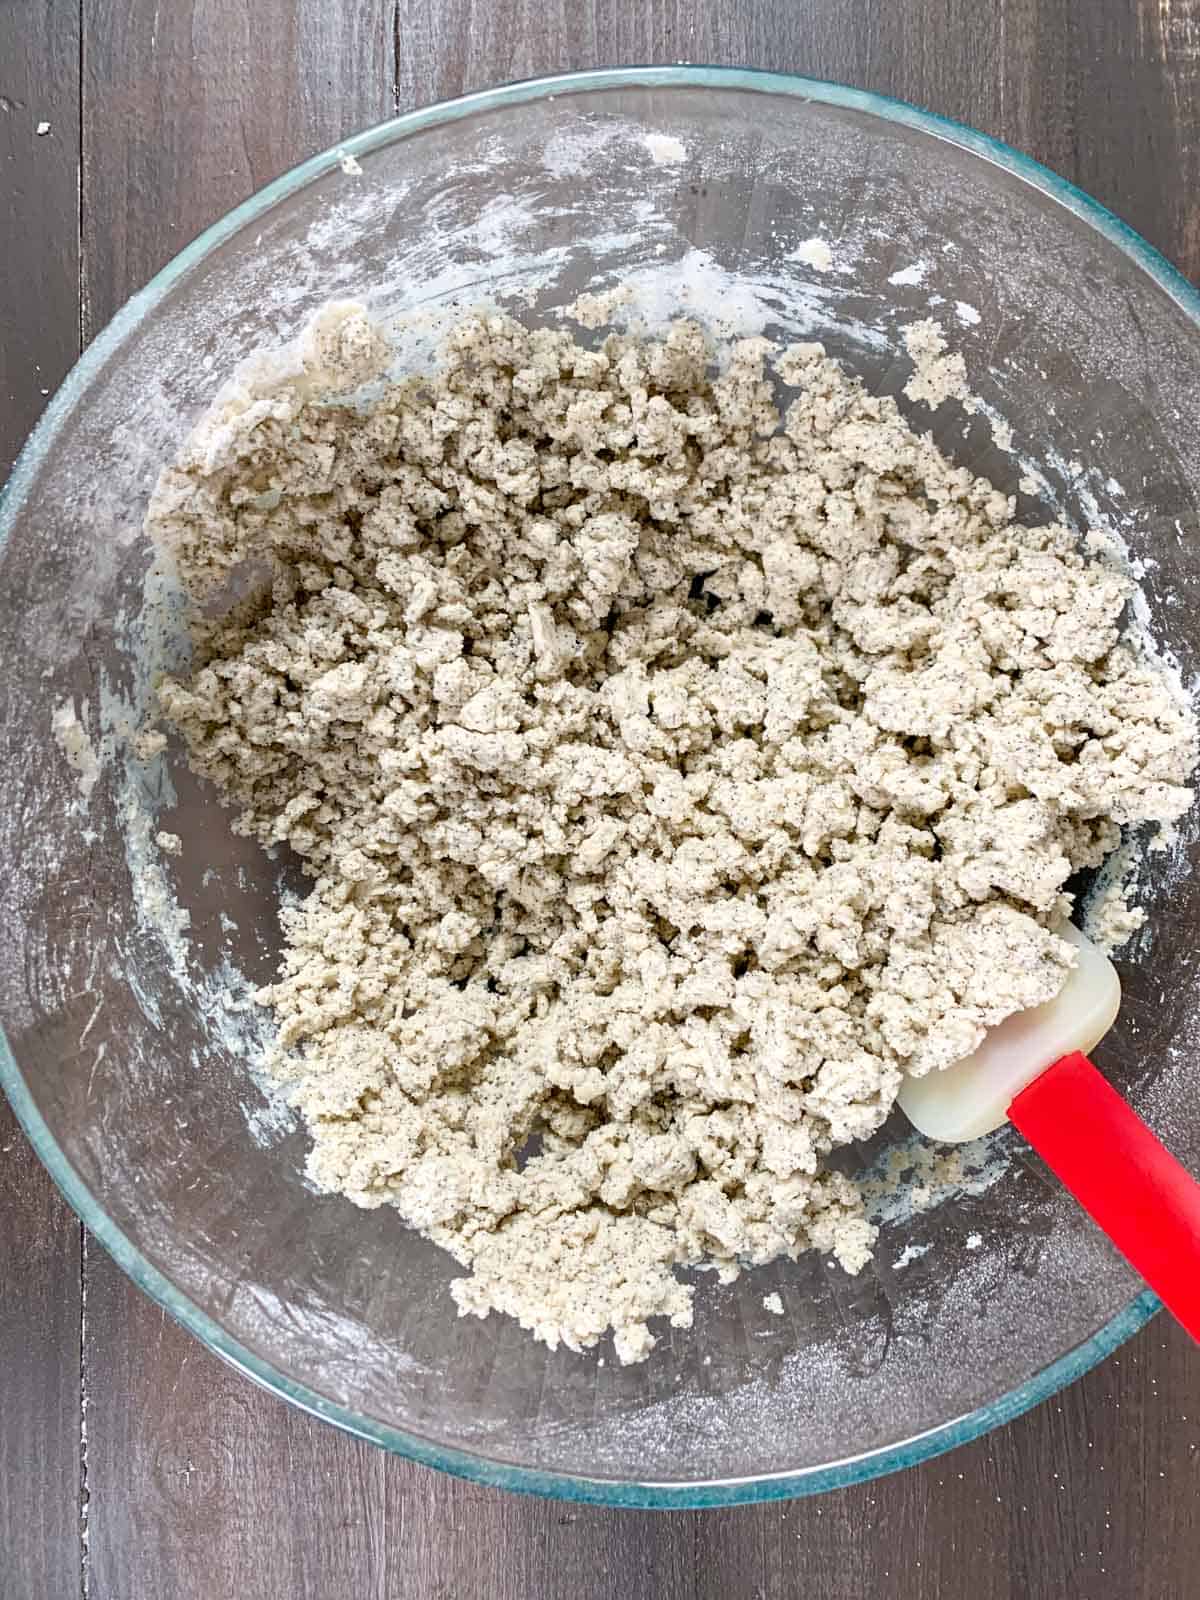 the texture of the dough will be crumbly before working it in a dough.